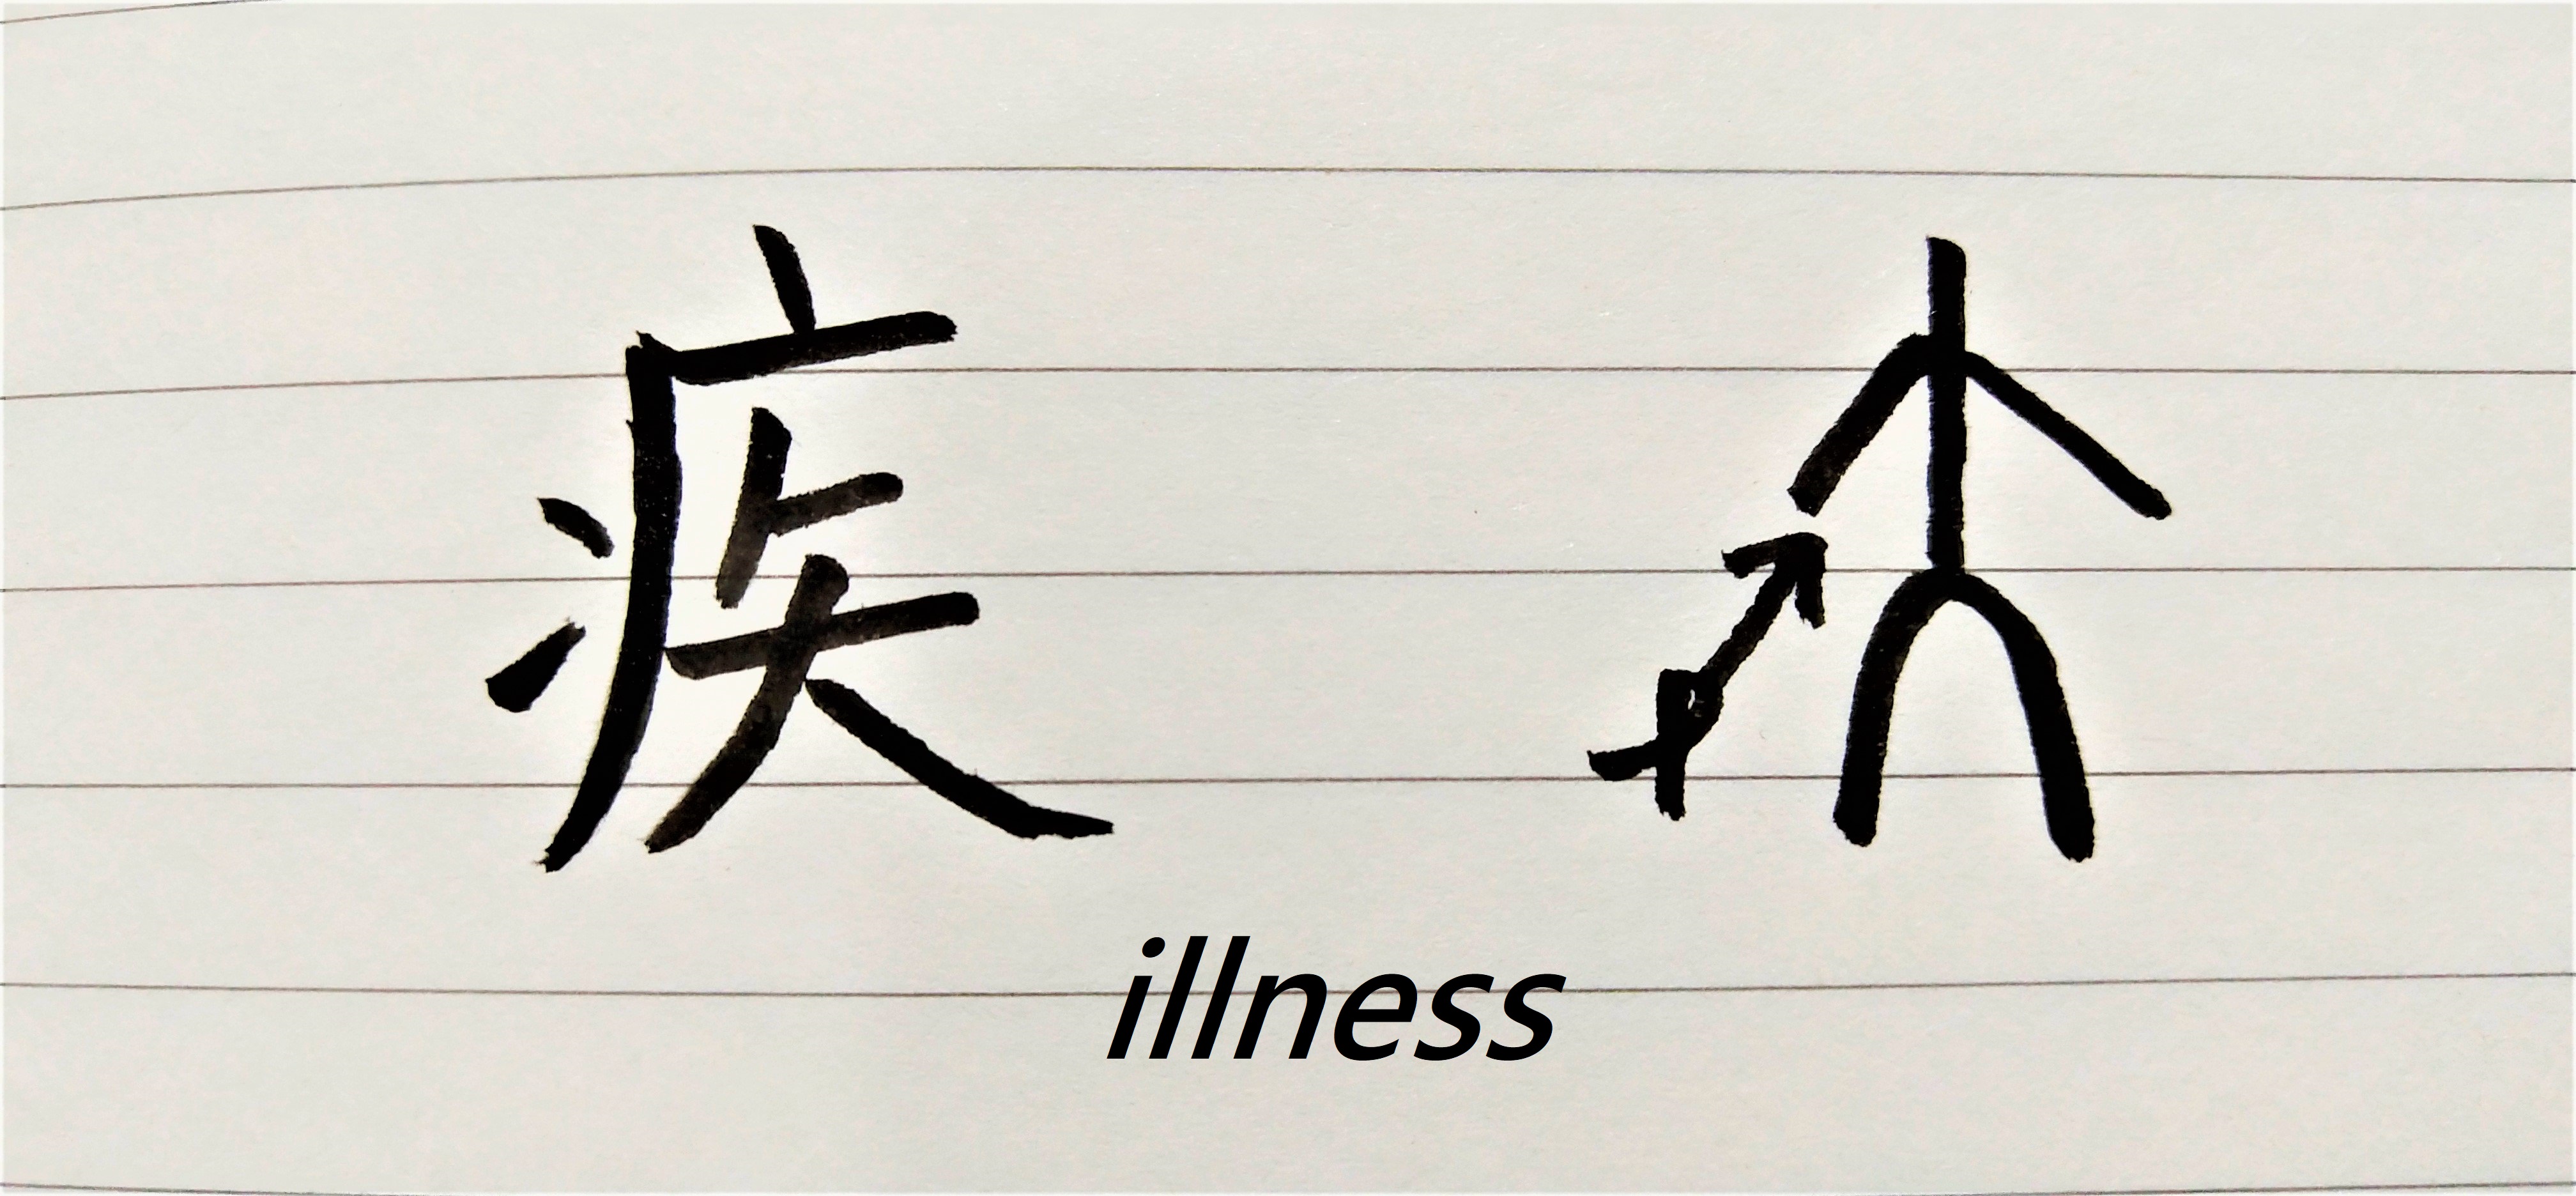 What does the Chinese character for illness tell you about the patients?